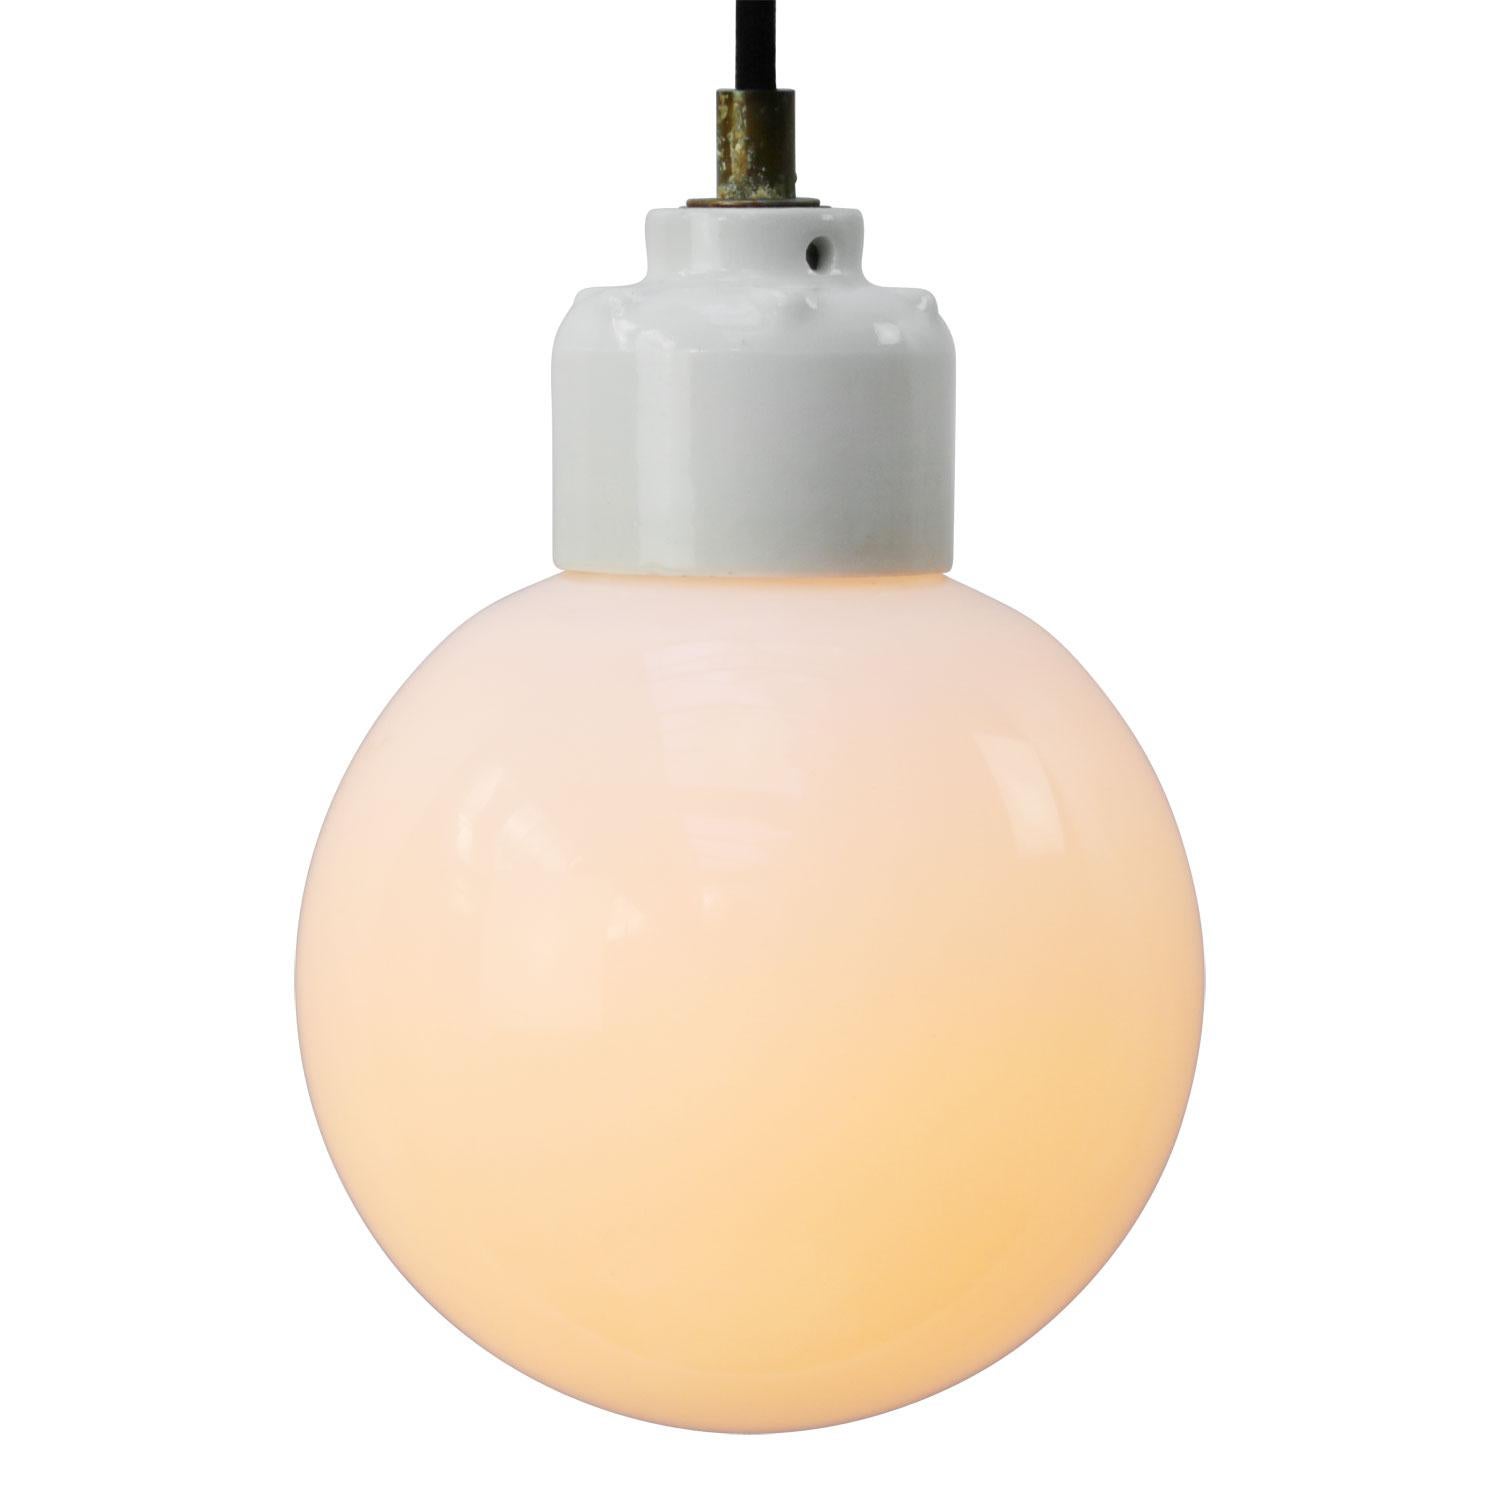 Opaline glass pendant.
2 meter black wire
Porcelain top with brass strain relief

Weight: 0.80 kg / 1.8 lb

E14 bulb holder. Priced per individual item. All lamps have been made suitable by international standards for incandescent light bulbs,